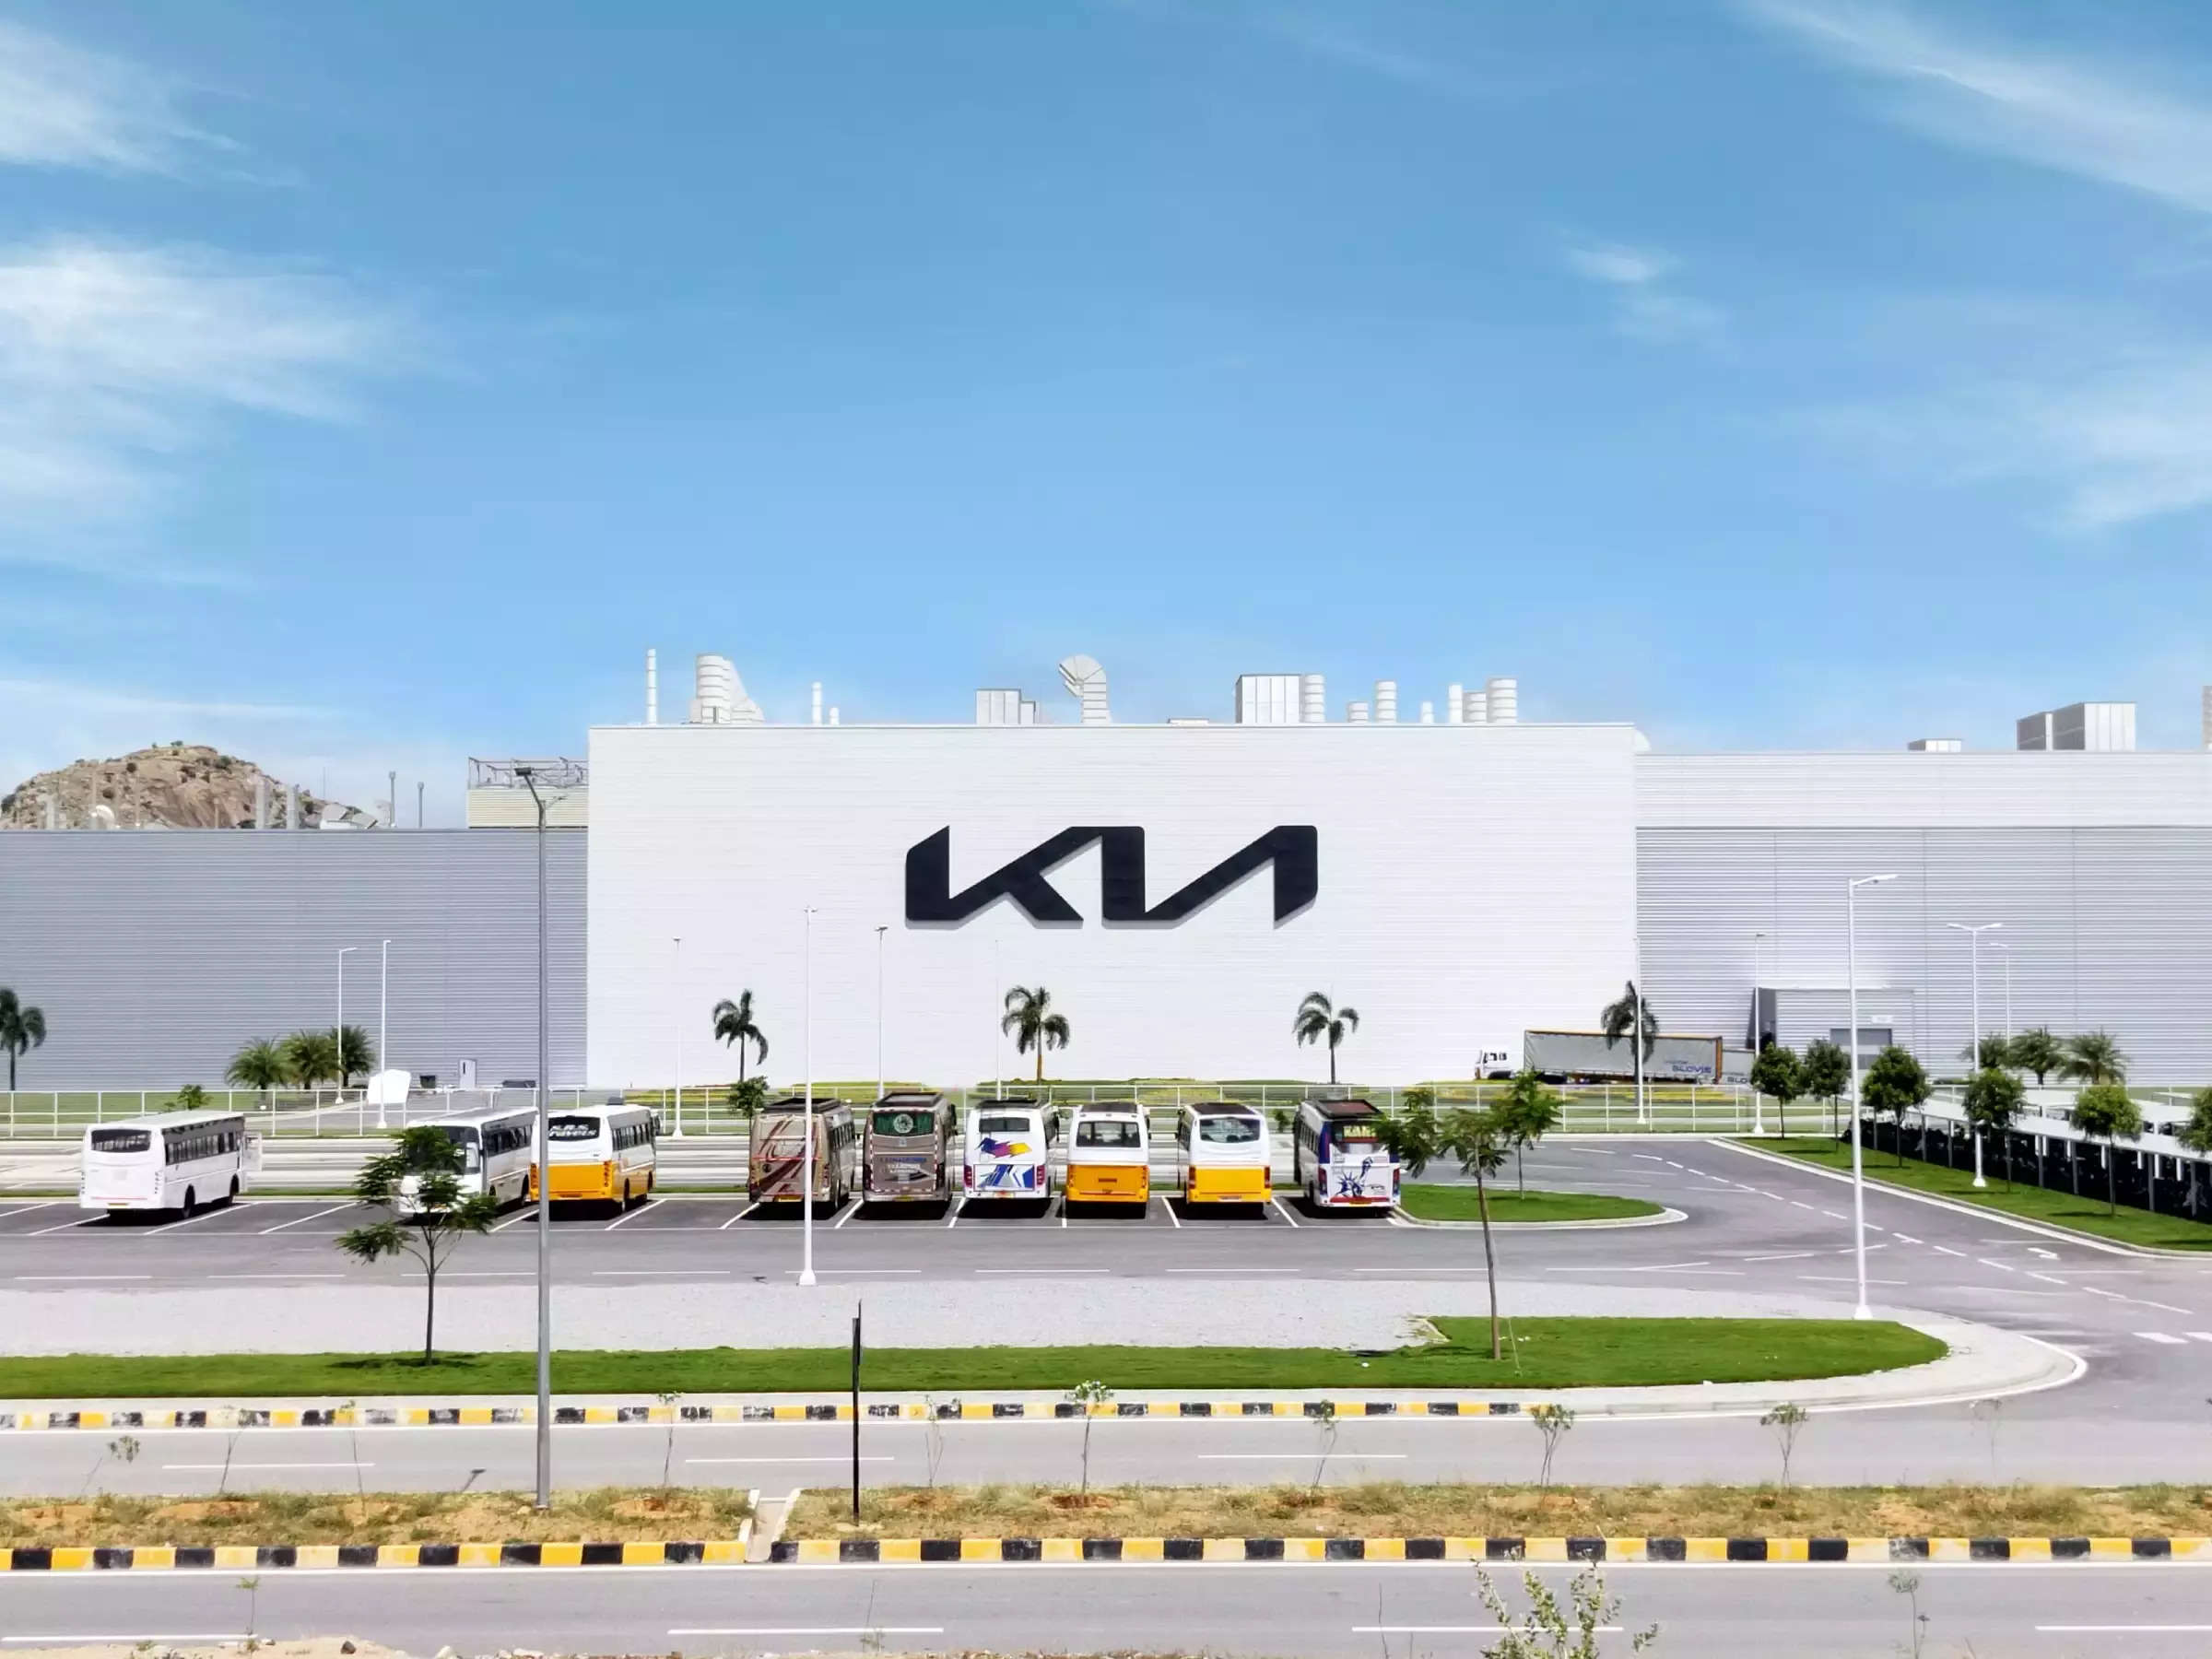  Kia India also claimed to have become one of the leading exporters of utility vehicles in the country, with a market share of over 25% in 2021.